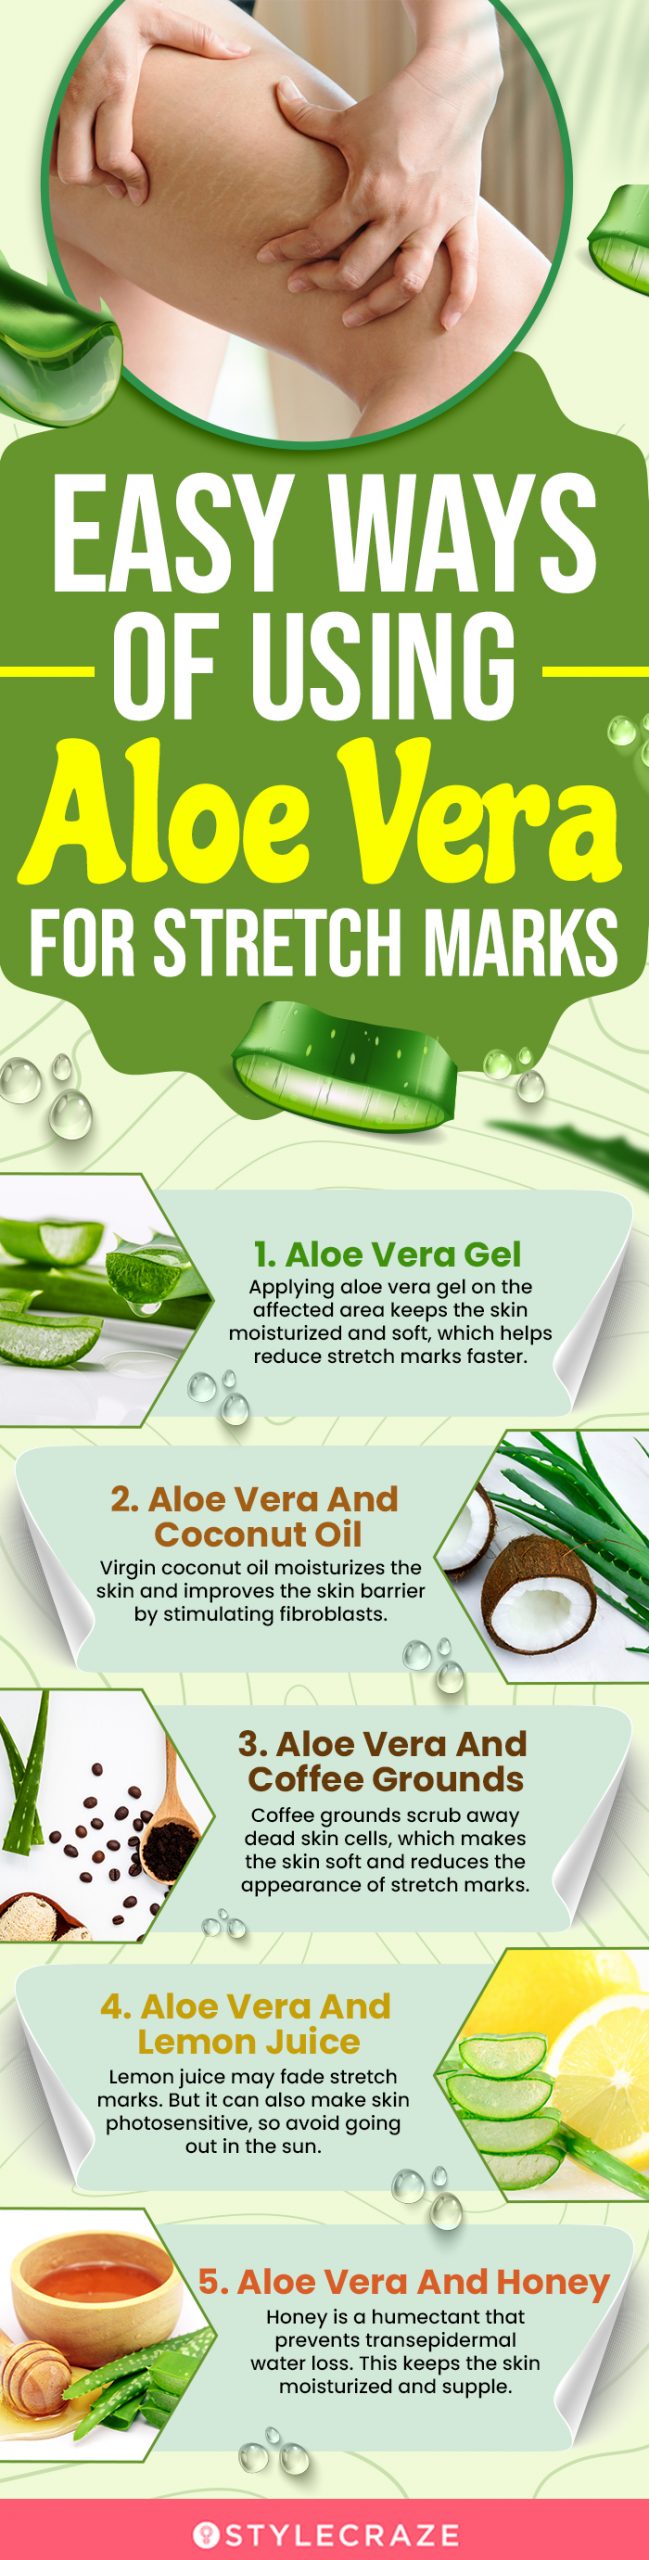 aloe vera for stretch marks (infographic)